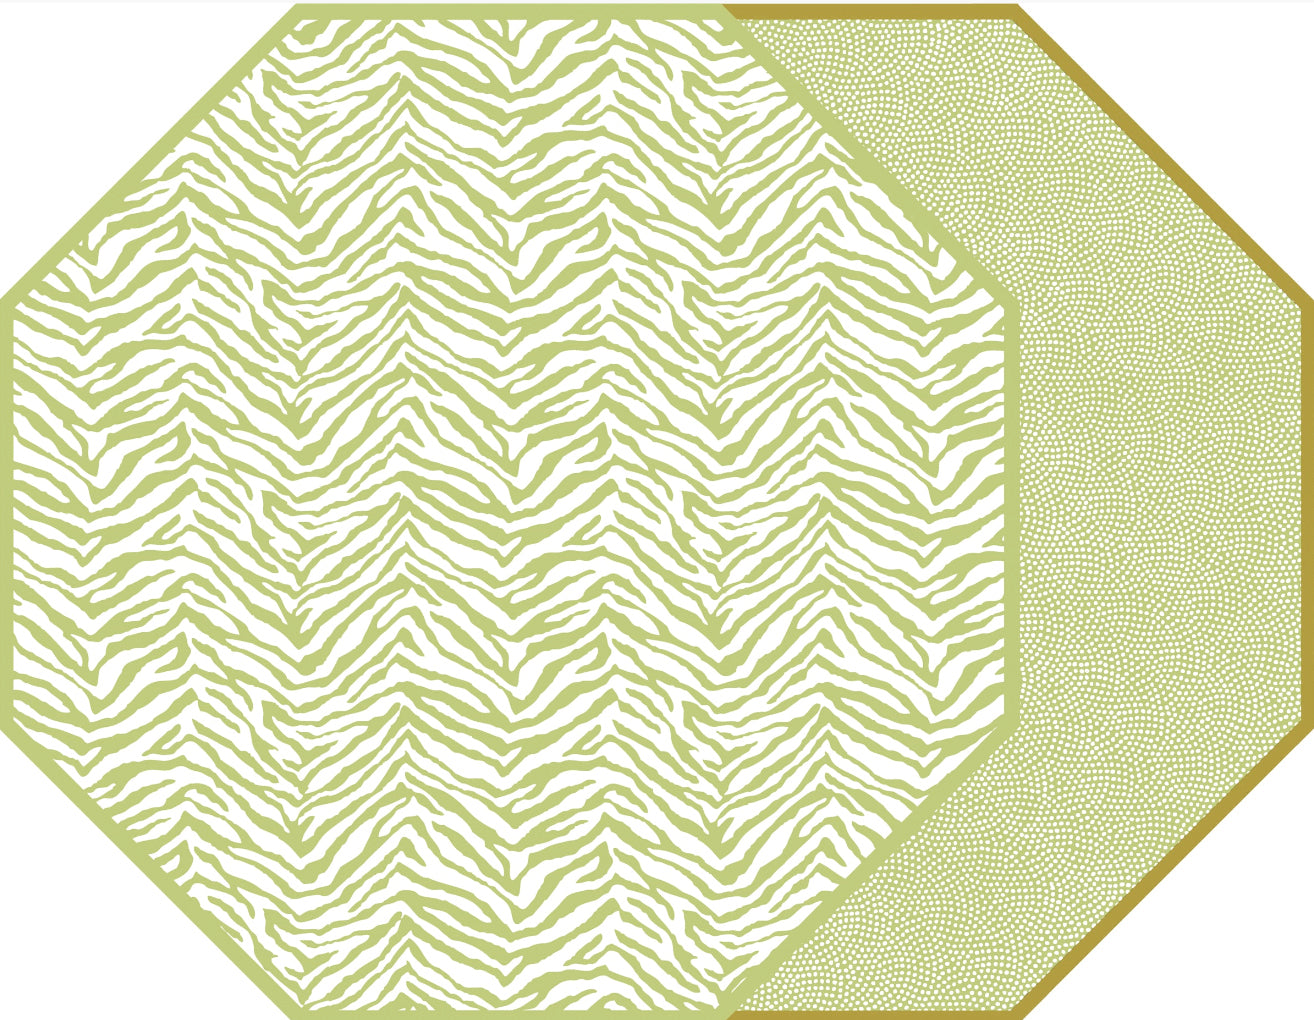 OCTAGONAL TWO SIDED ZEBRA PLACEMAT WITH DOT FAN ~ LIME